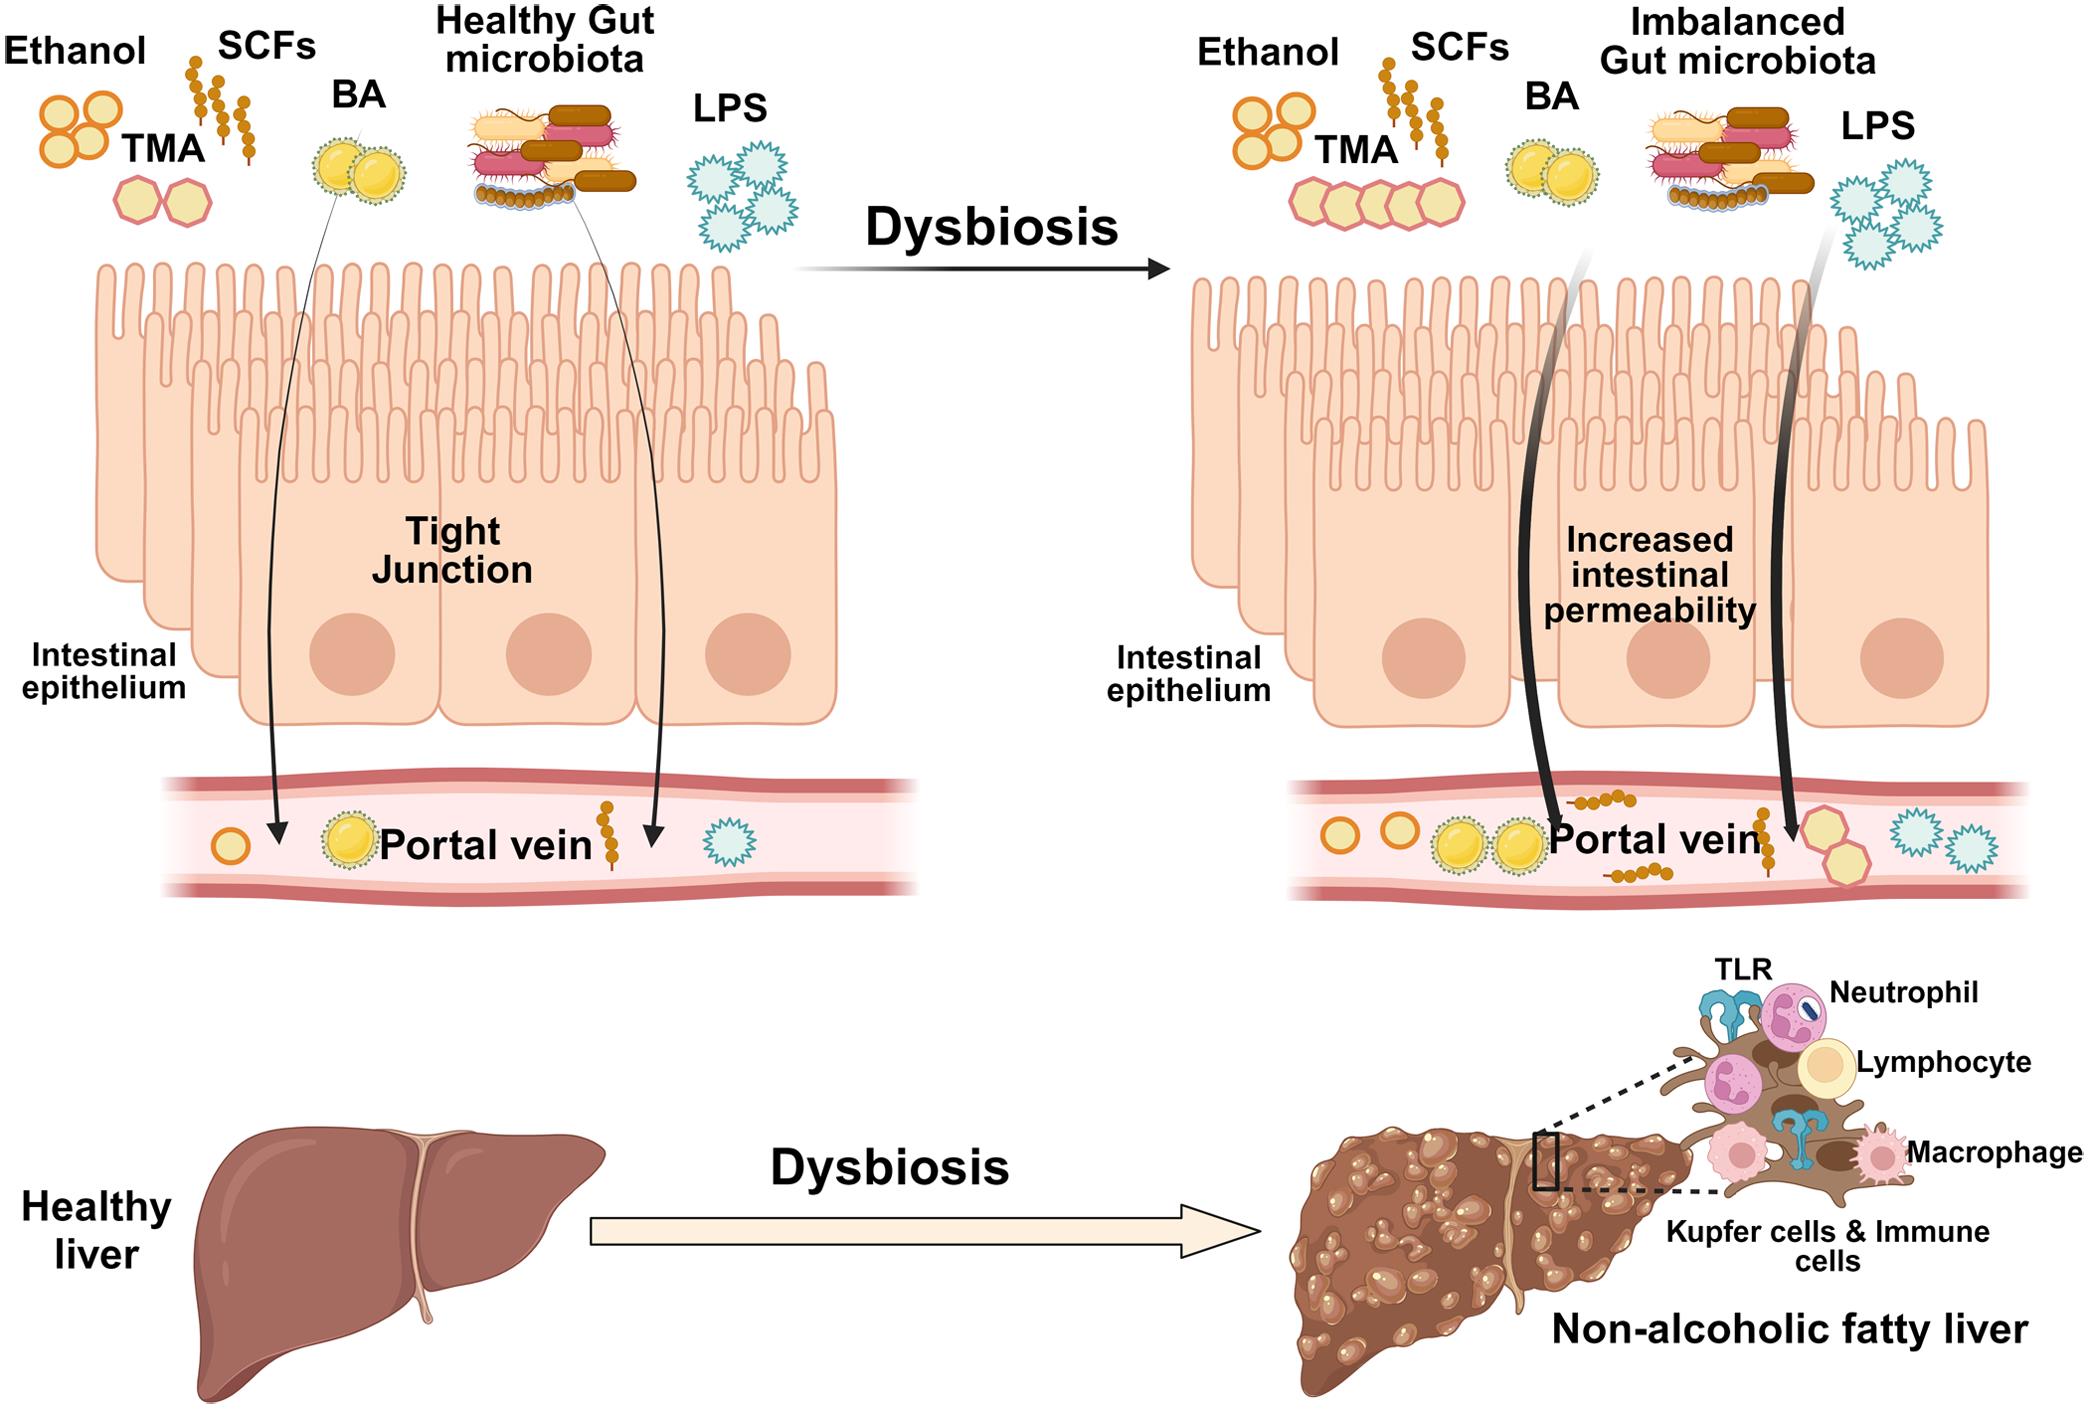 Schematic representation of how the gut microbiota contributes to the development of NAFLD.